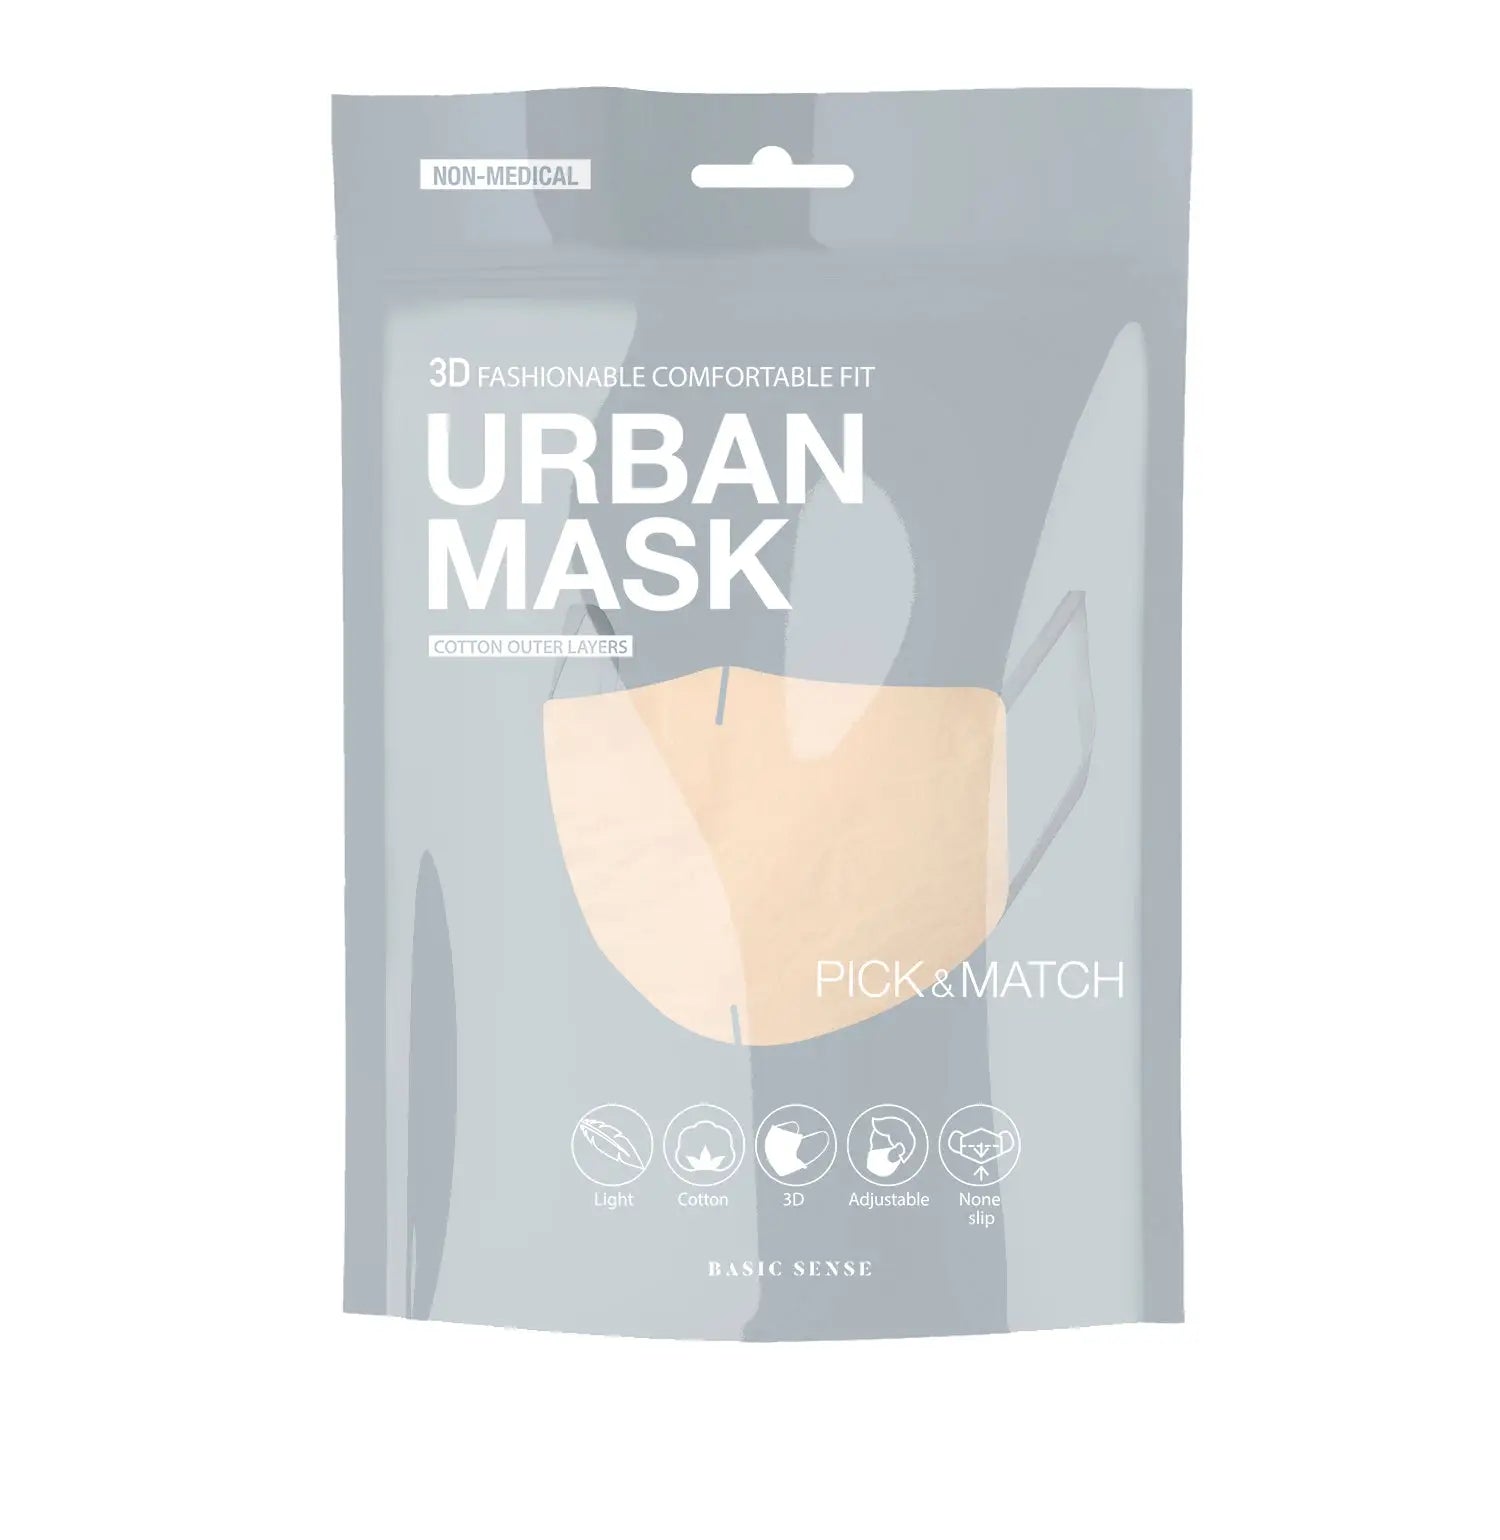 The Face Shop Urban Cotton Mask displayed in 3D Design 100% Cotton Fashion Face Mask Covering.